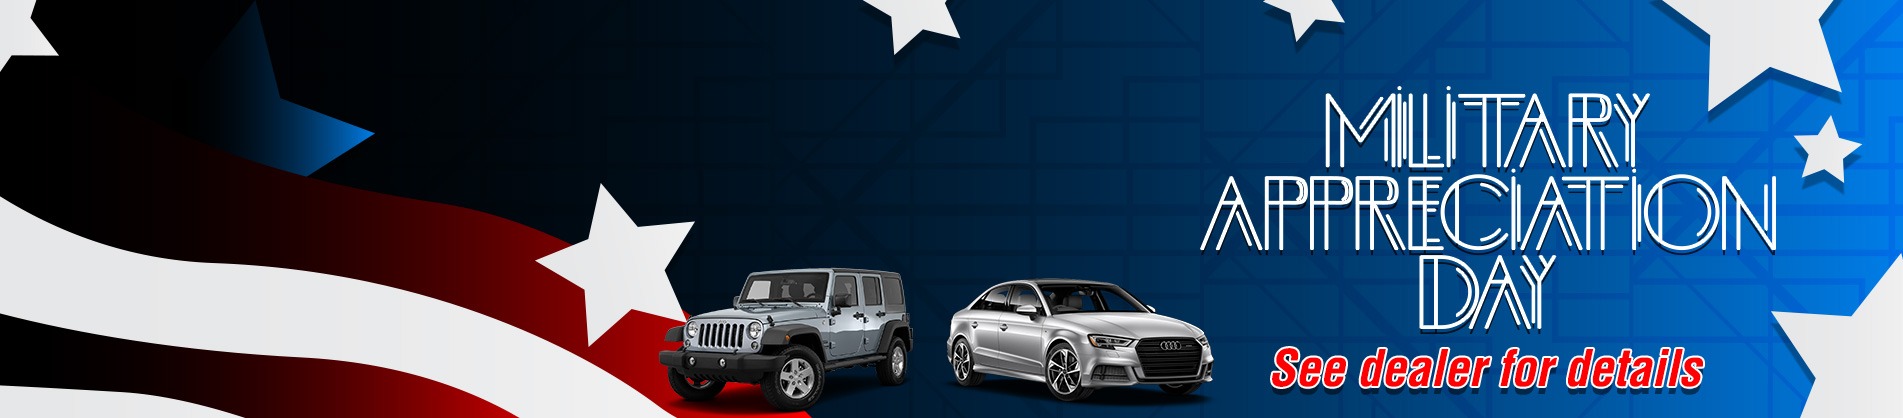 Military Appreciation Day see dealer for details